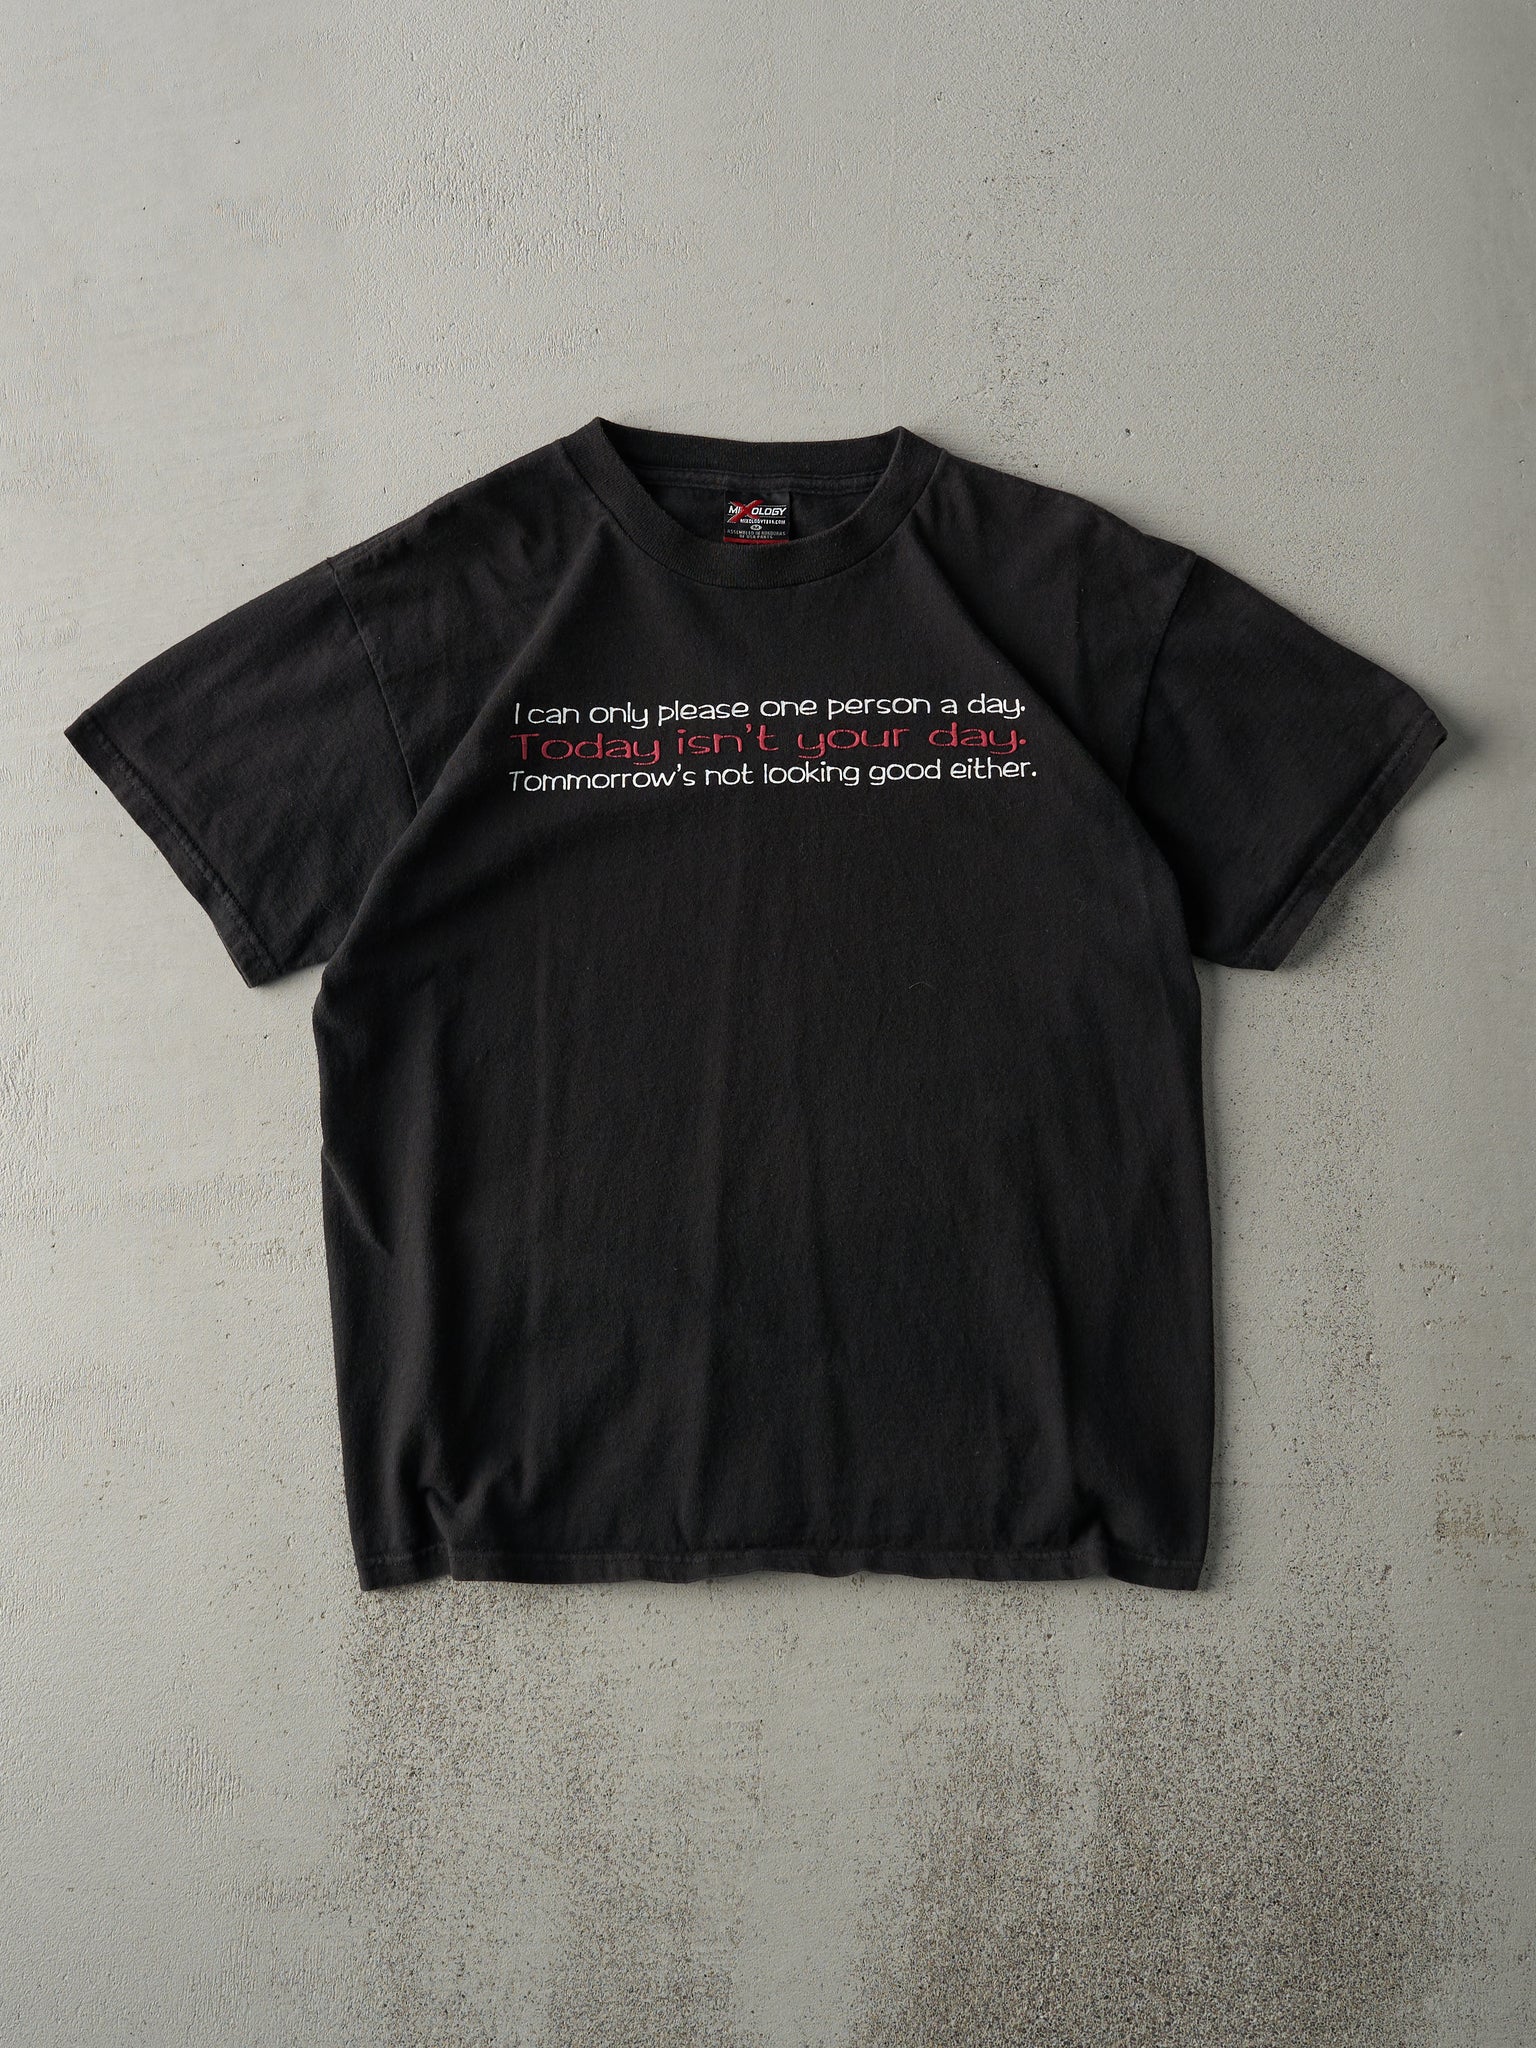 Vintage Y2K Black "Today Isn't Your Day" Tee (M)